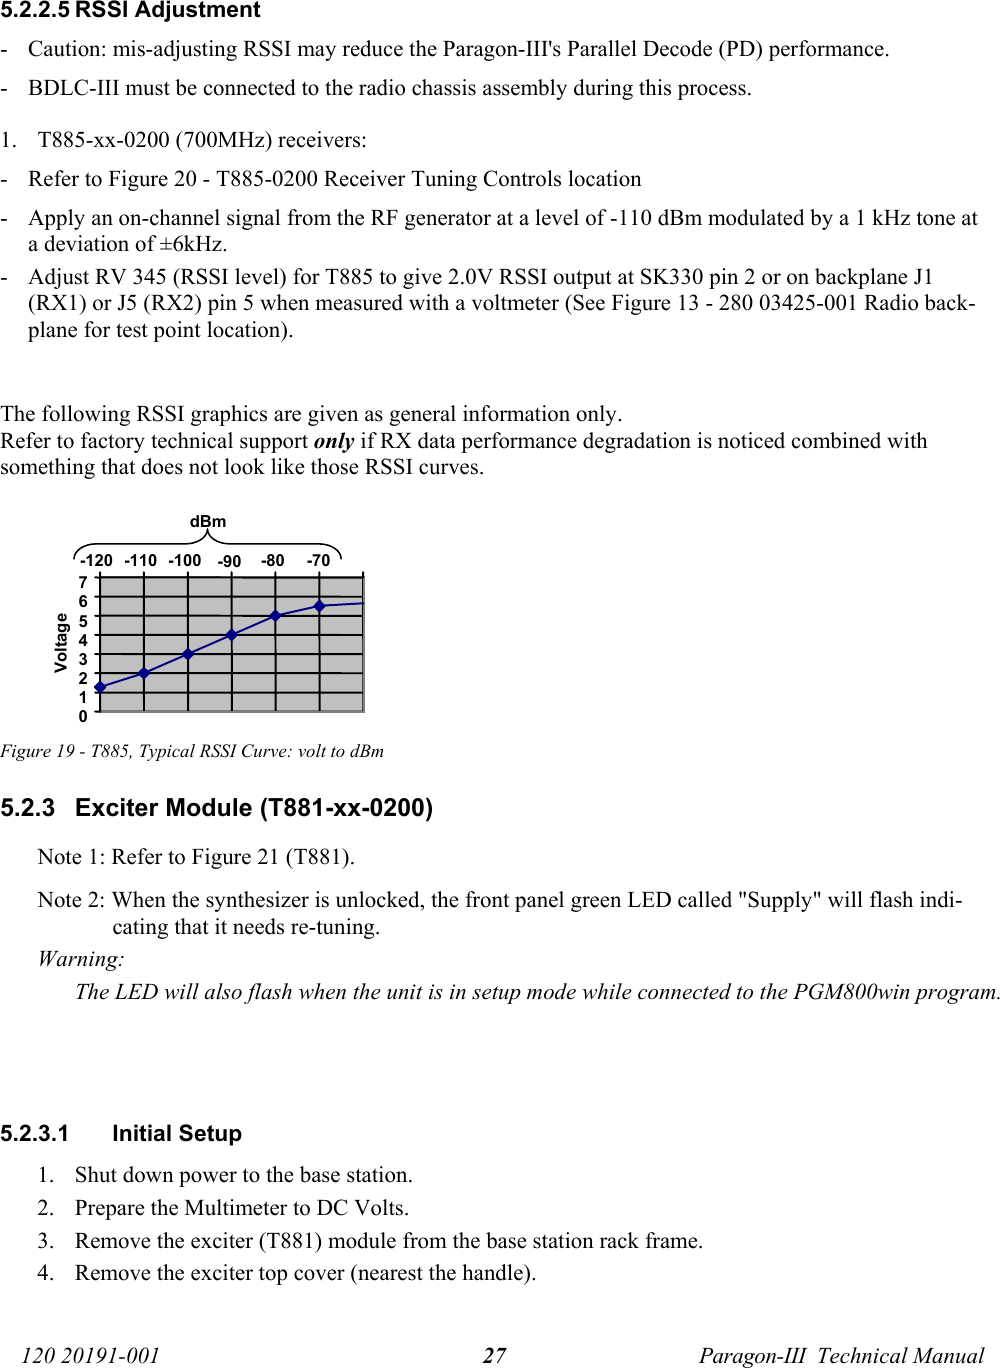   120 20191-001  Paragon-III  Technical Manual 27 5.2.2.5 RSSI Adjustment  - Caution: mis-adjusting RSSI may reduce the Paragon-III&apos;s Parallel Decode (PD) performance.    - BDLC-III must be connected to the radio chassis assembly during this process. 1. T885-xx-0200 (700MHz) receivers: - Refer to Figure 20 - T885-0200 Receiver Tuning Controls location - Apply an on-channel signal from the RF generator at a level of -110 dBm modulated by a 1 kHz tone at a deviation of ±6kHz. - Adjust RV 345 (RSSI level) for T885 to give 2.0V RSSI output at SK330 pin 2 or on backplane J1 (RX1) or J5 (RX2) pin 5 when measured with a voltmeter (See Figure 13 - 280 03425-001 Radio back-plane for test point location).  The following RSSI graphics are given as general information only. Refer to factory technical support only if RX data performance degradation is noticed combined with something that does not look like those RSSI curves. Figure 19 - T885, Typical RSSI Curve: volt to dBm 5.2.3  Exciter Module (T881-xx-0200) Note 1: Refer to Figure 21 (T881). Note 2: When the synthesizer is unlocked, the front panel green LED called &quot;Supply&quot; will flash indi-cating that it needs re-tuning.  Warning:    The LED will also flash when the unit is in setup mode while connected to the PGM800win program.    5.2.3.1 Initial Setup 1. Shut down power to the base station. 2. Prepare the Multimeter to DC Volts. 3. Remove the exciter (T881) module from the base station rack frame. 4. Remove the exciter top cover (nearest the handle). 0 1 2 3 4 5 6 7 -120  -110  -100   -90   -80   -70  dBm Voltage 